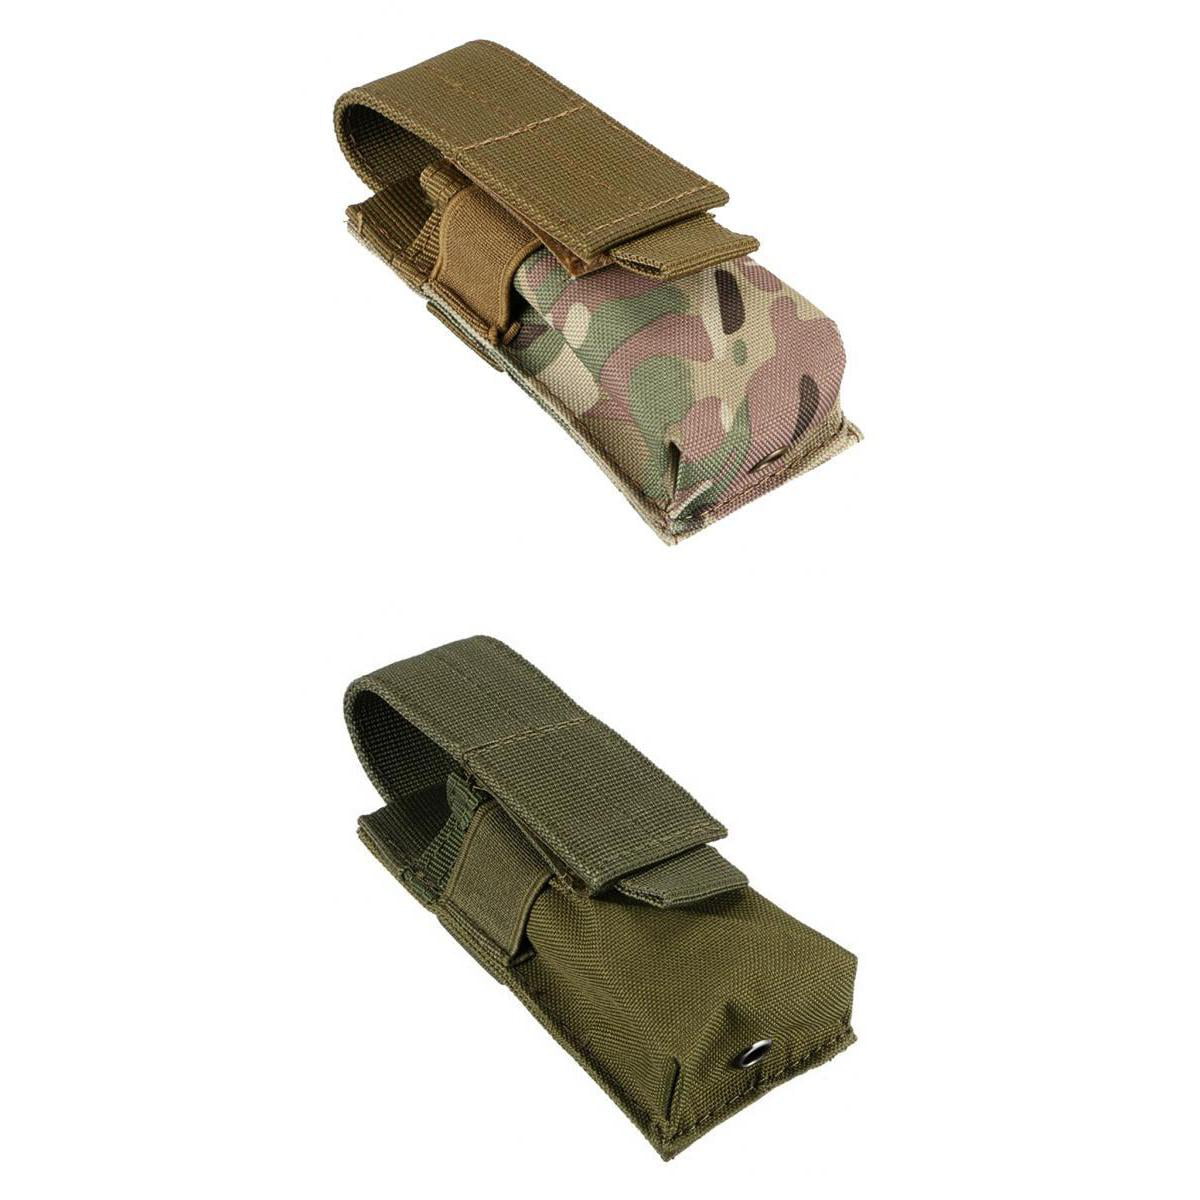 4x Durable Oxford Cloth Axe Sheath Hunting Cover for Outdoor 15.5x11cm 